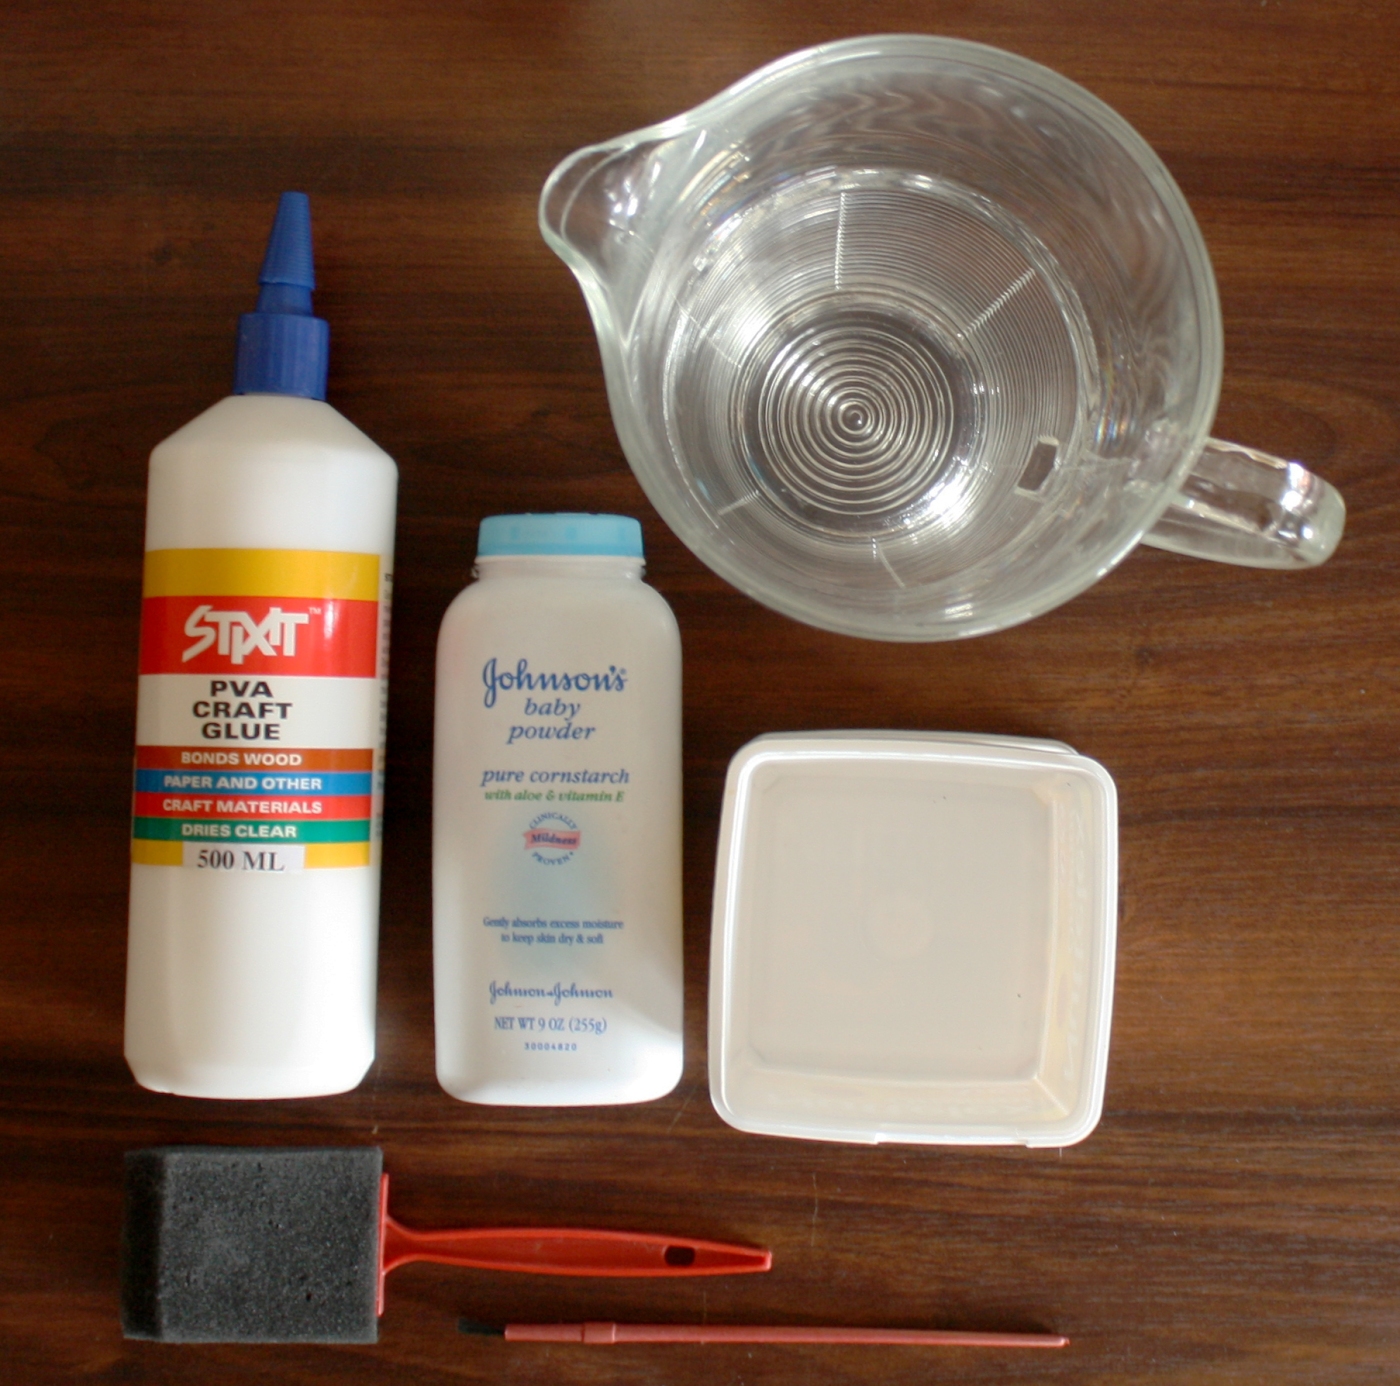 9 Things You Should Know About Gesso